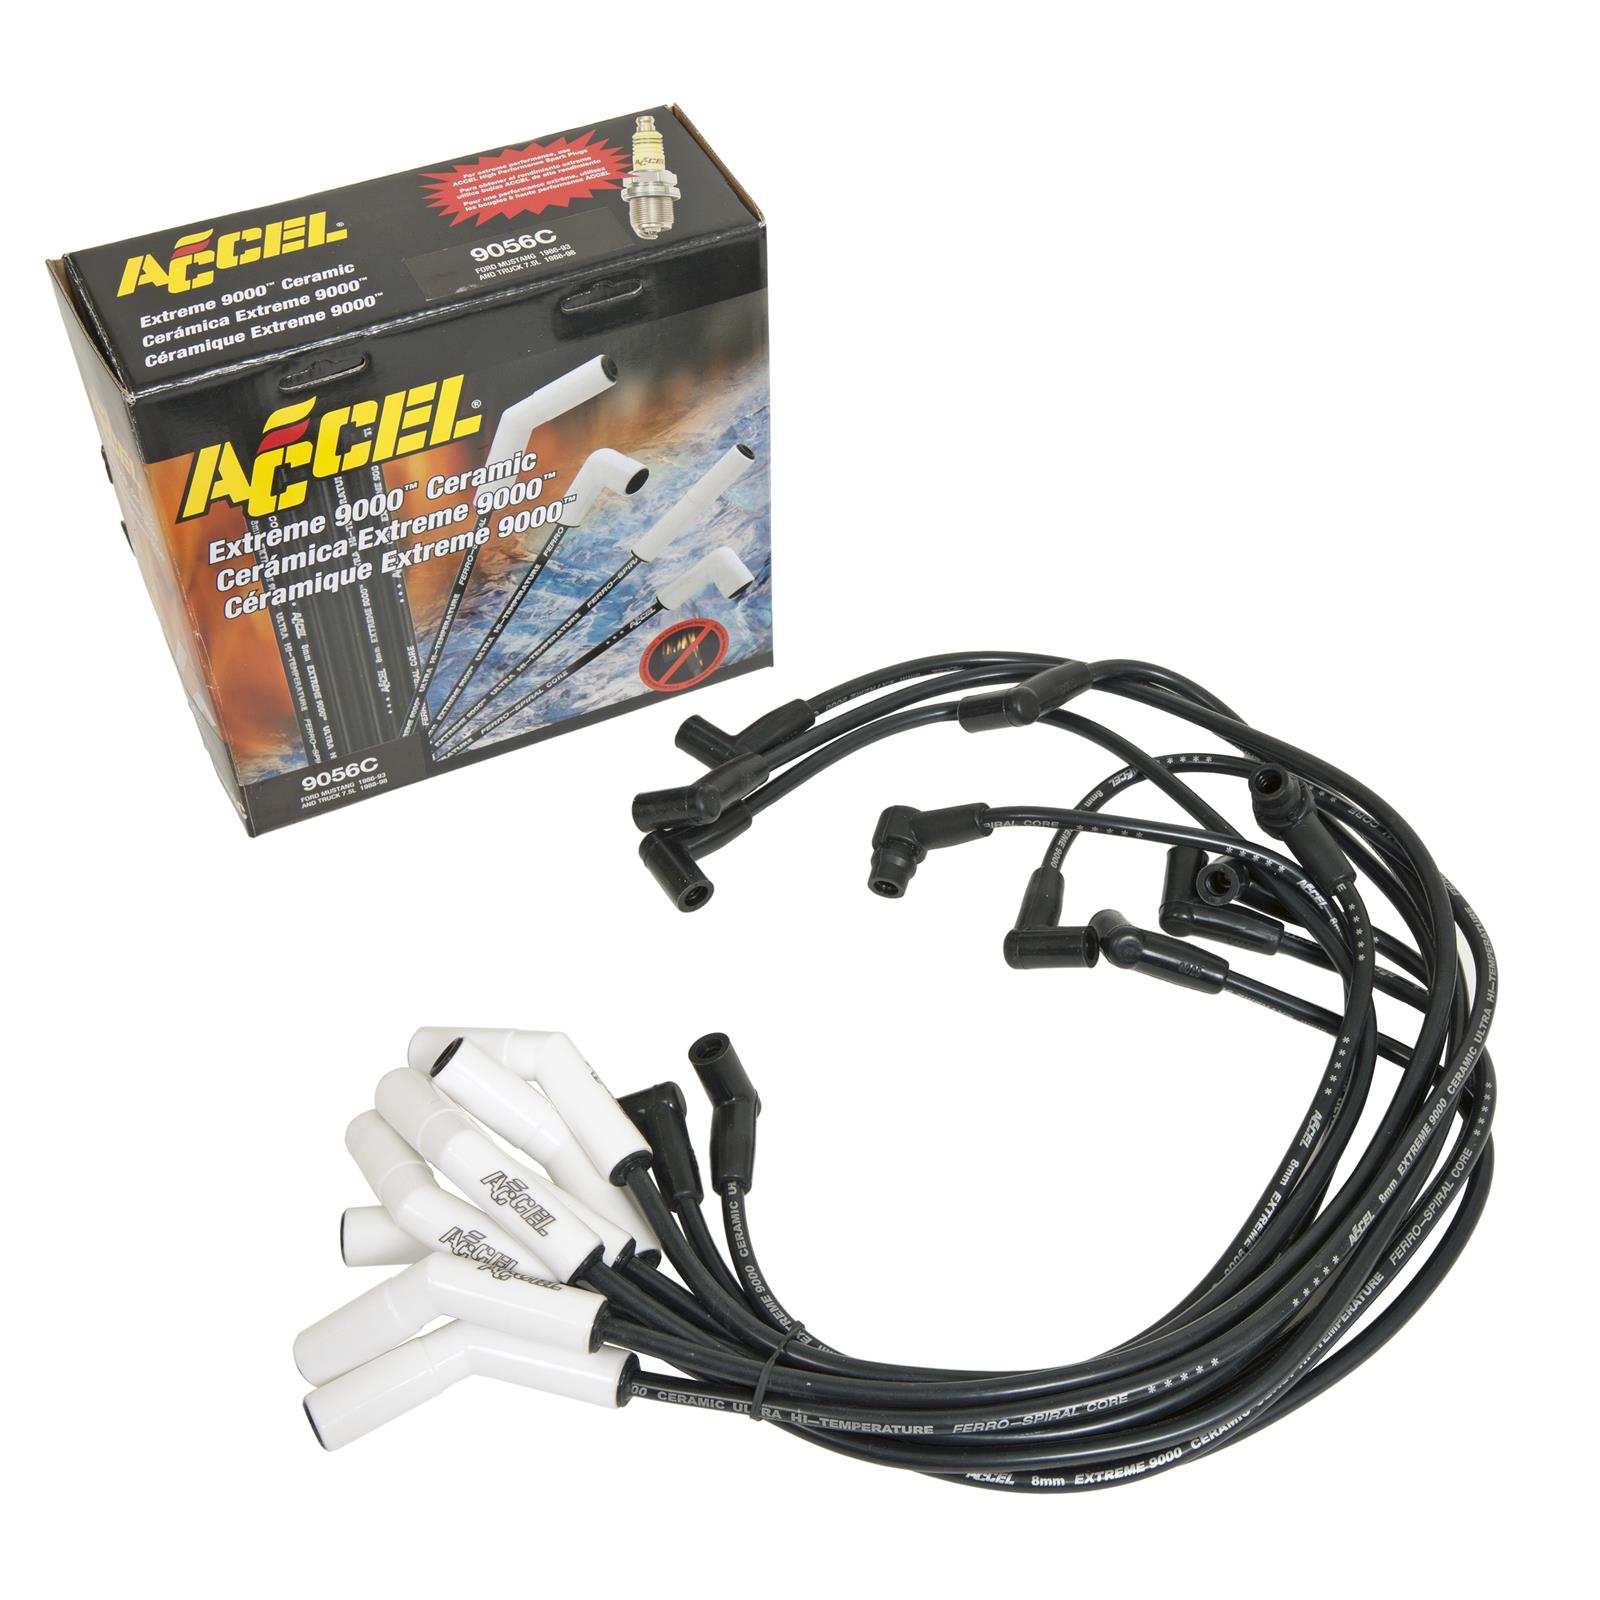 Accel 9060 Extreme 9000 Heat Reflective Wire Set 